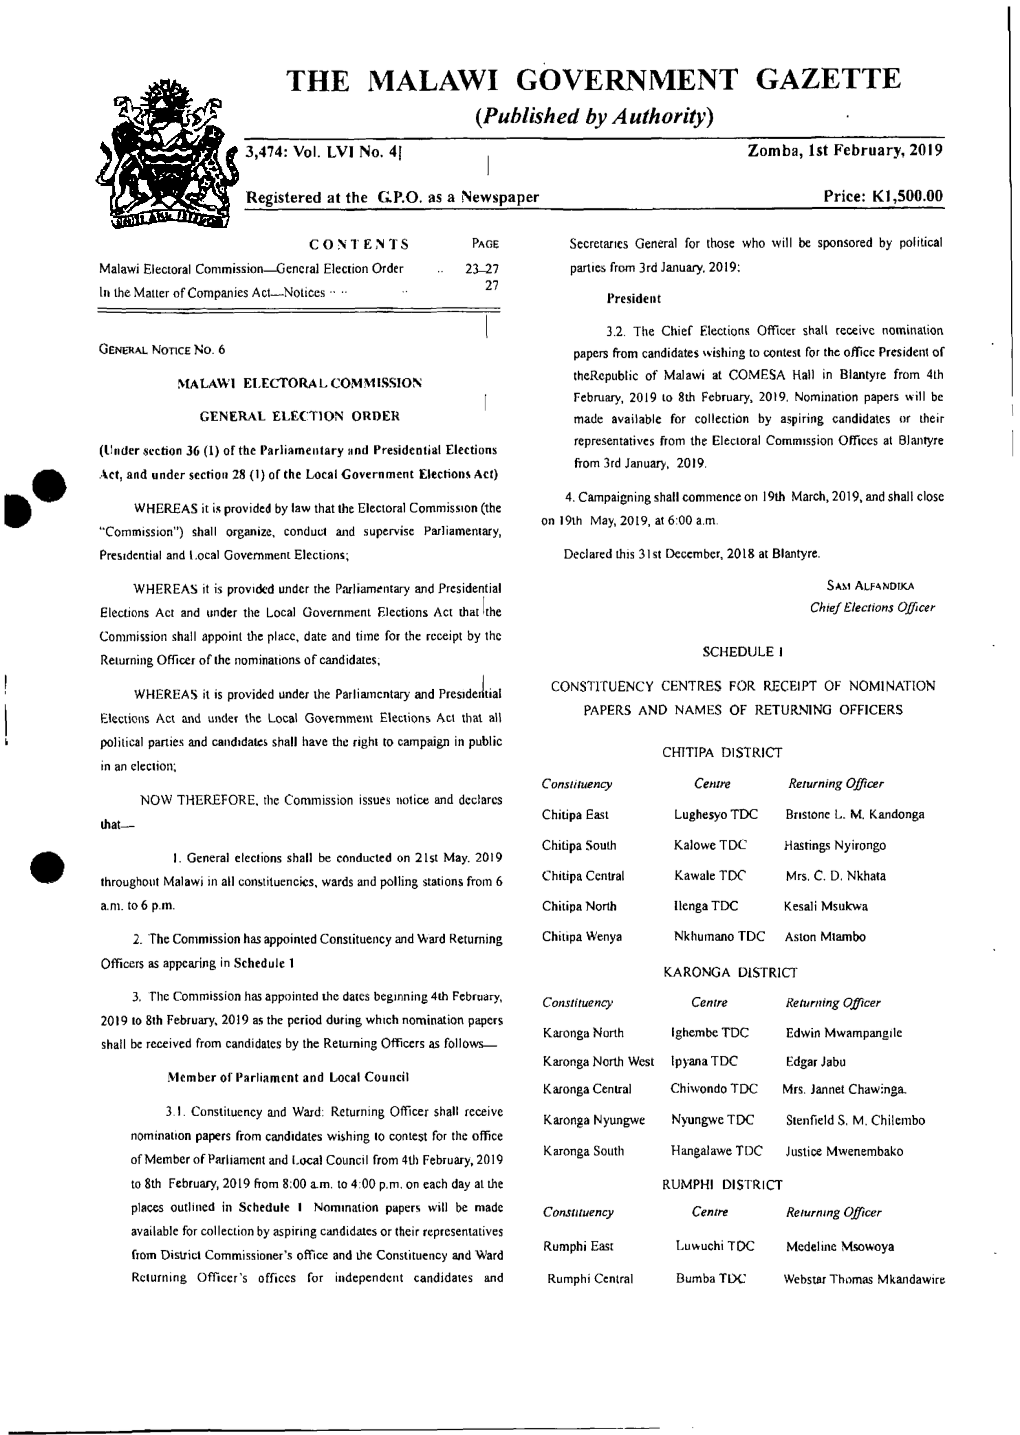 THE MALAWI GOVERNMENT GAZETTE (Published by Authority) 3,474: Vol